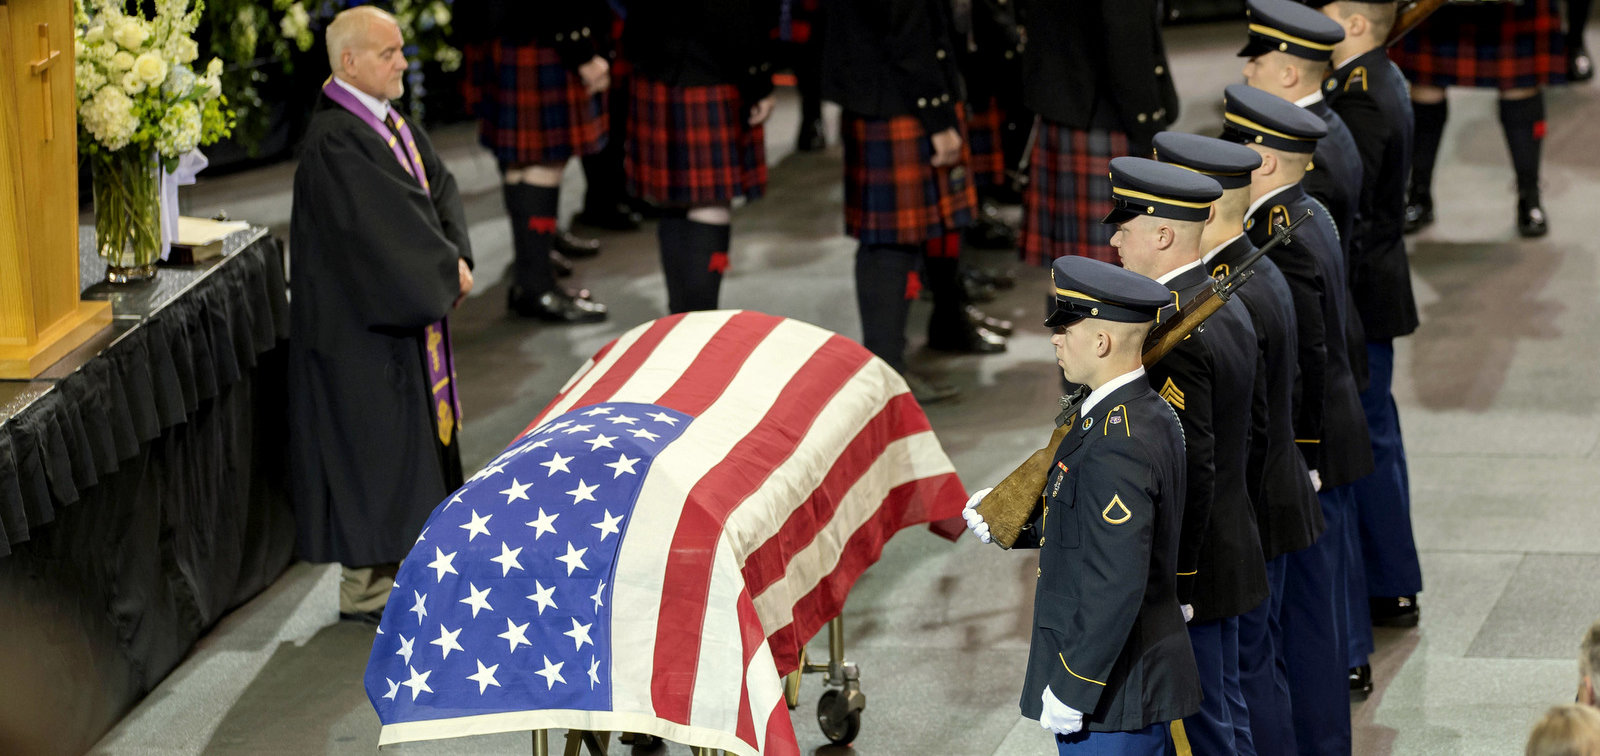 A military honor guard stands by the casket of 33-year-old slain police officer Jason Moszer during his funeral services Monday, Feb. 22, 2016, at Scheels Arena in Fargo. Moszer was shot and killed Feb. 11 while responding to a domestic disturbance.